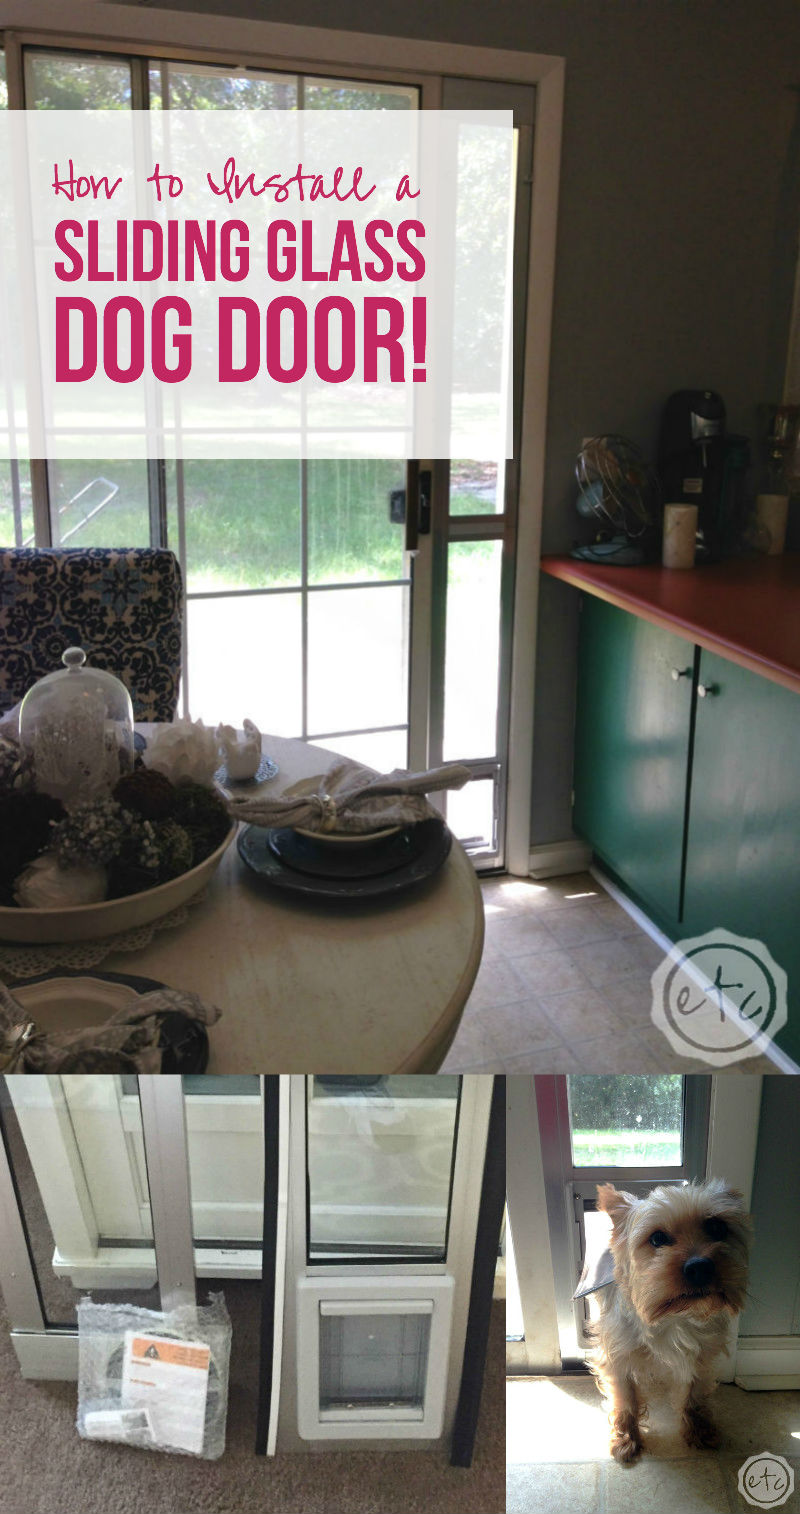 How to Install a Sliding Glass Dog Door!